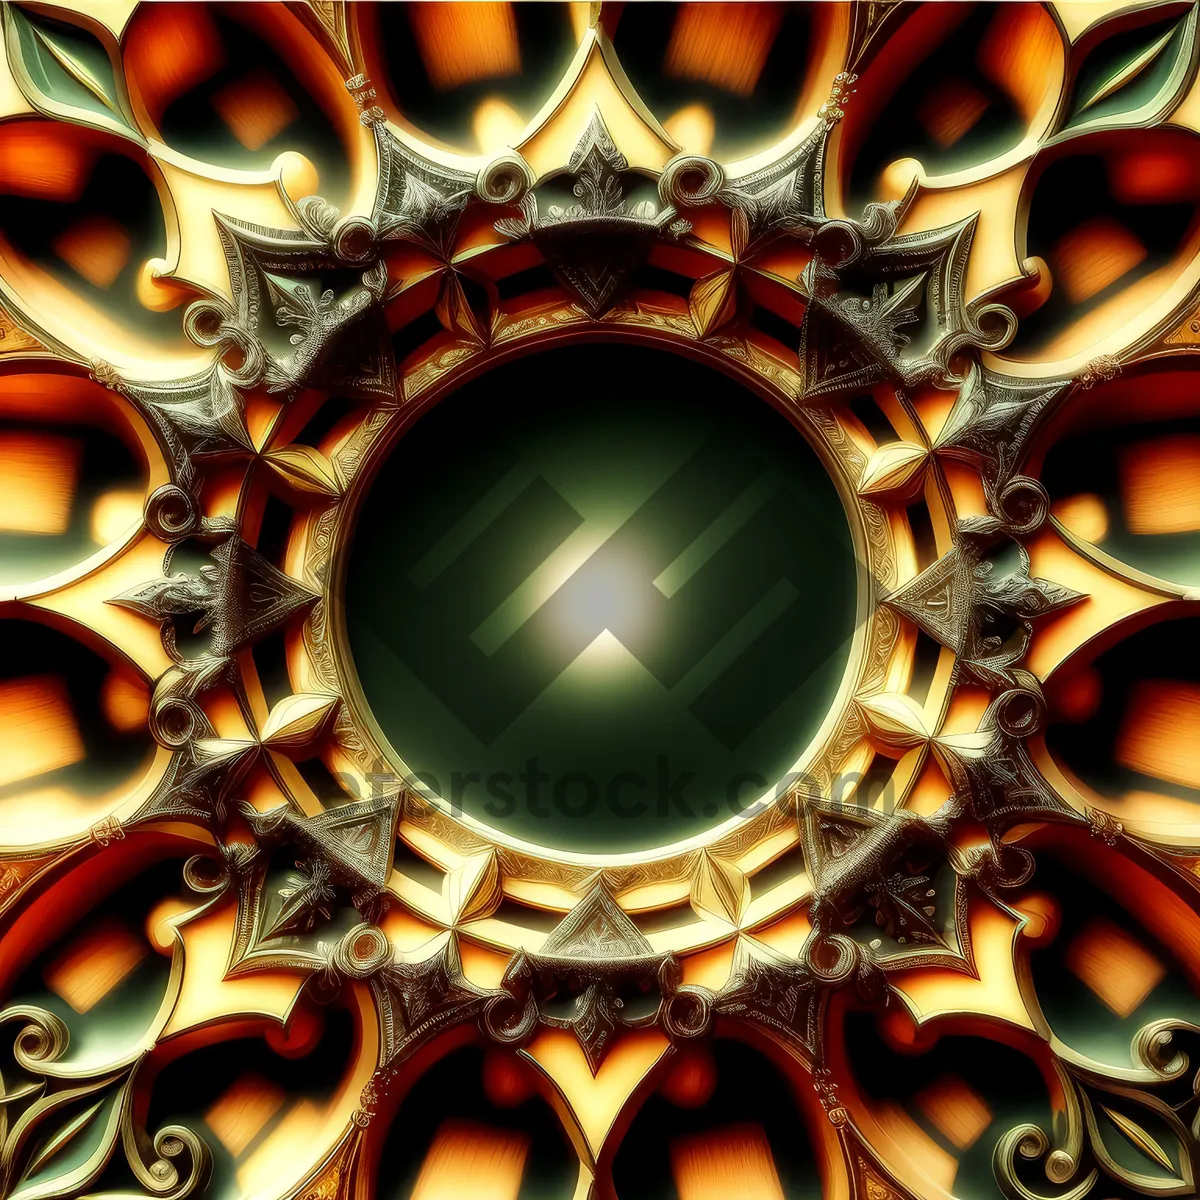 Picture of Digital Fractal Art: Colorful Heraldry Design with Clutch Texture